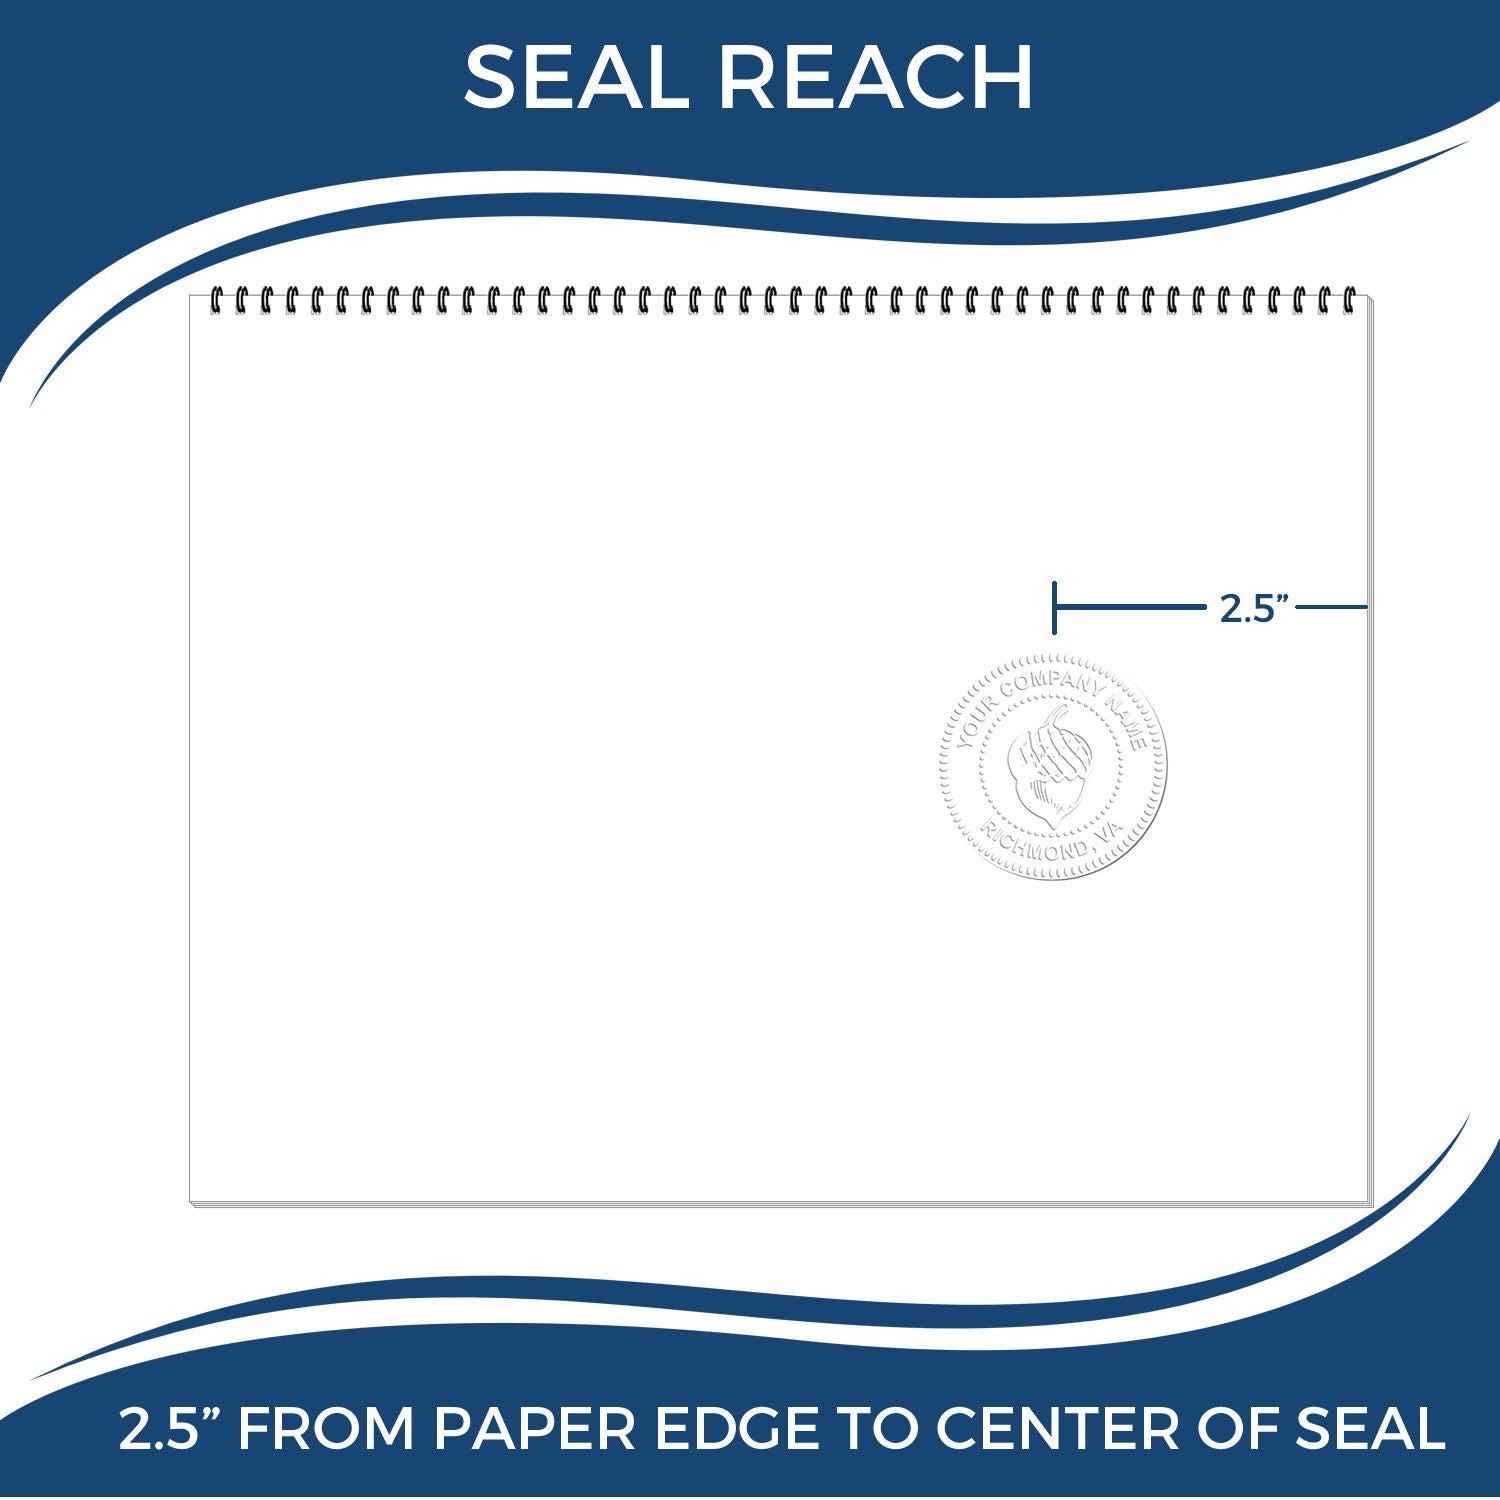 An infographic showing the seal reach which is represented by a ruler and a miniature seal image of the Heavy Duty Cast Iron Hawaii Geologist Seal Embosser